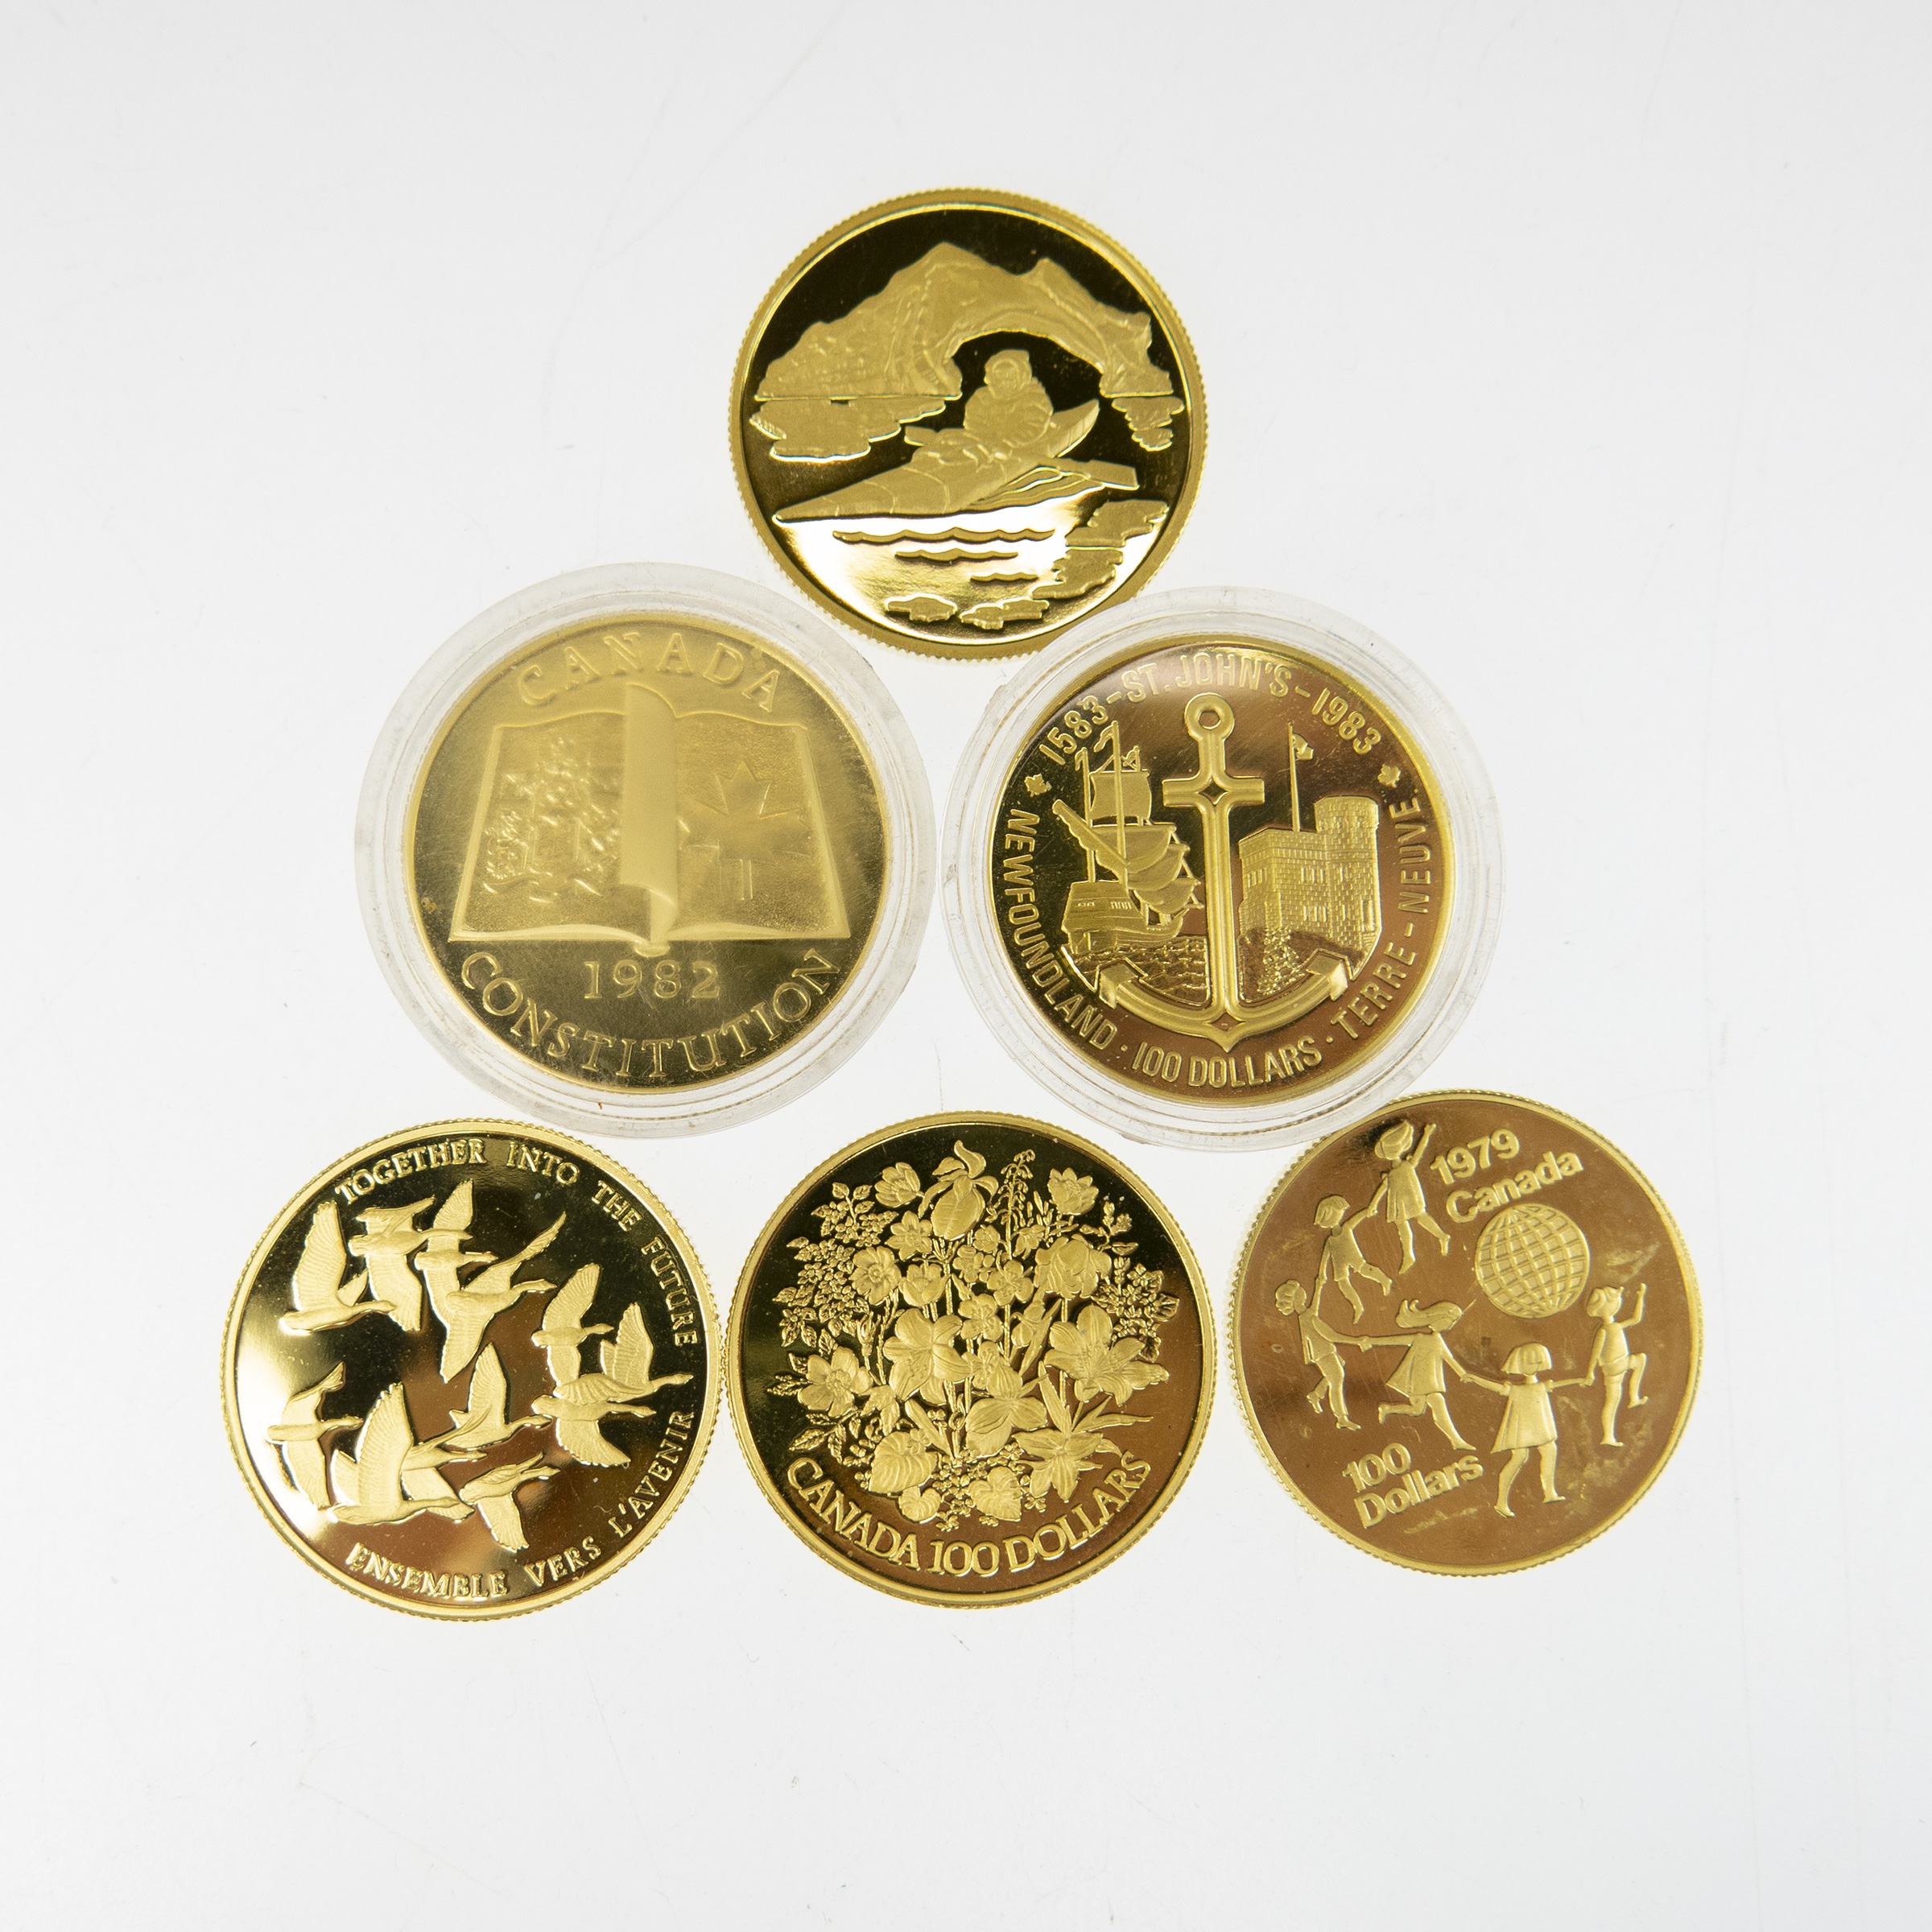 Six Canadian $100 Gold Coins